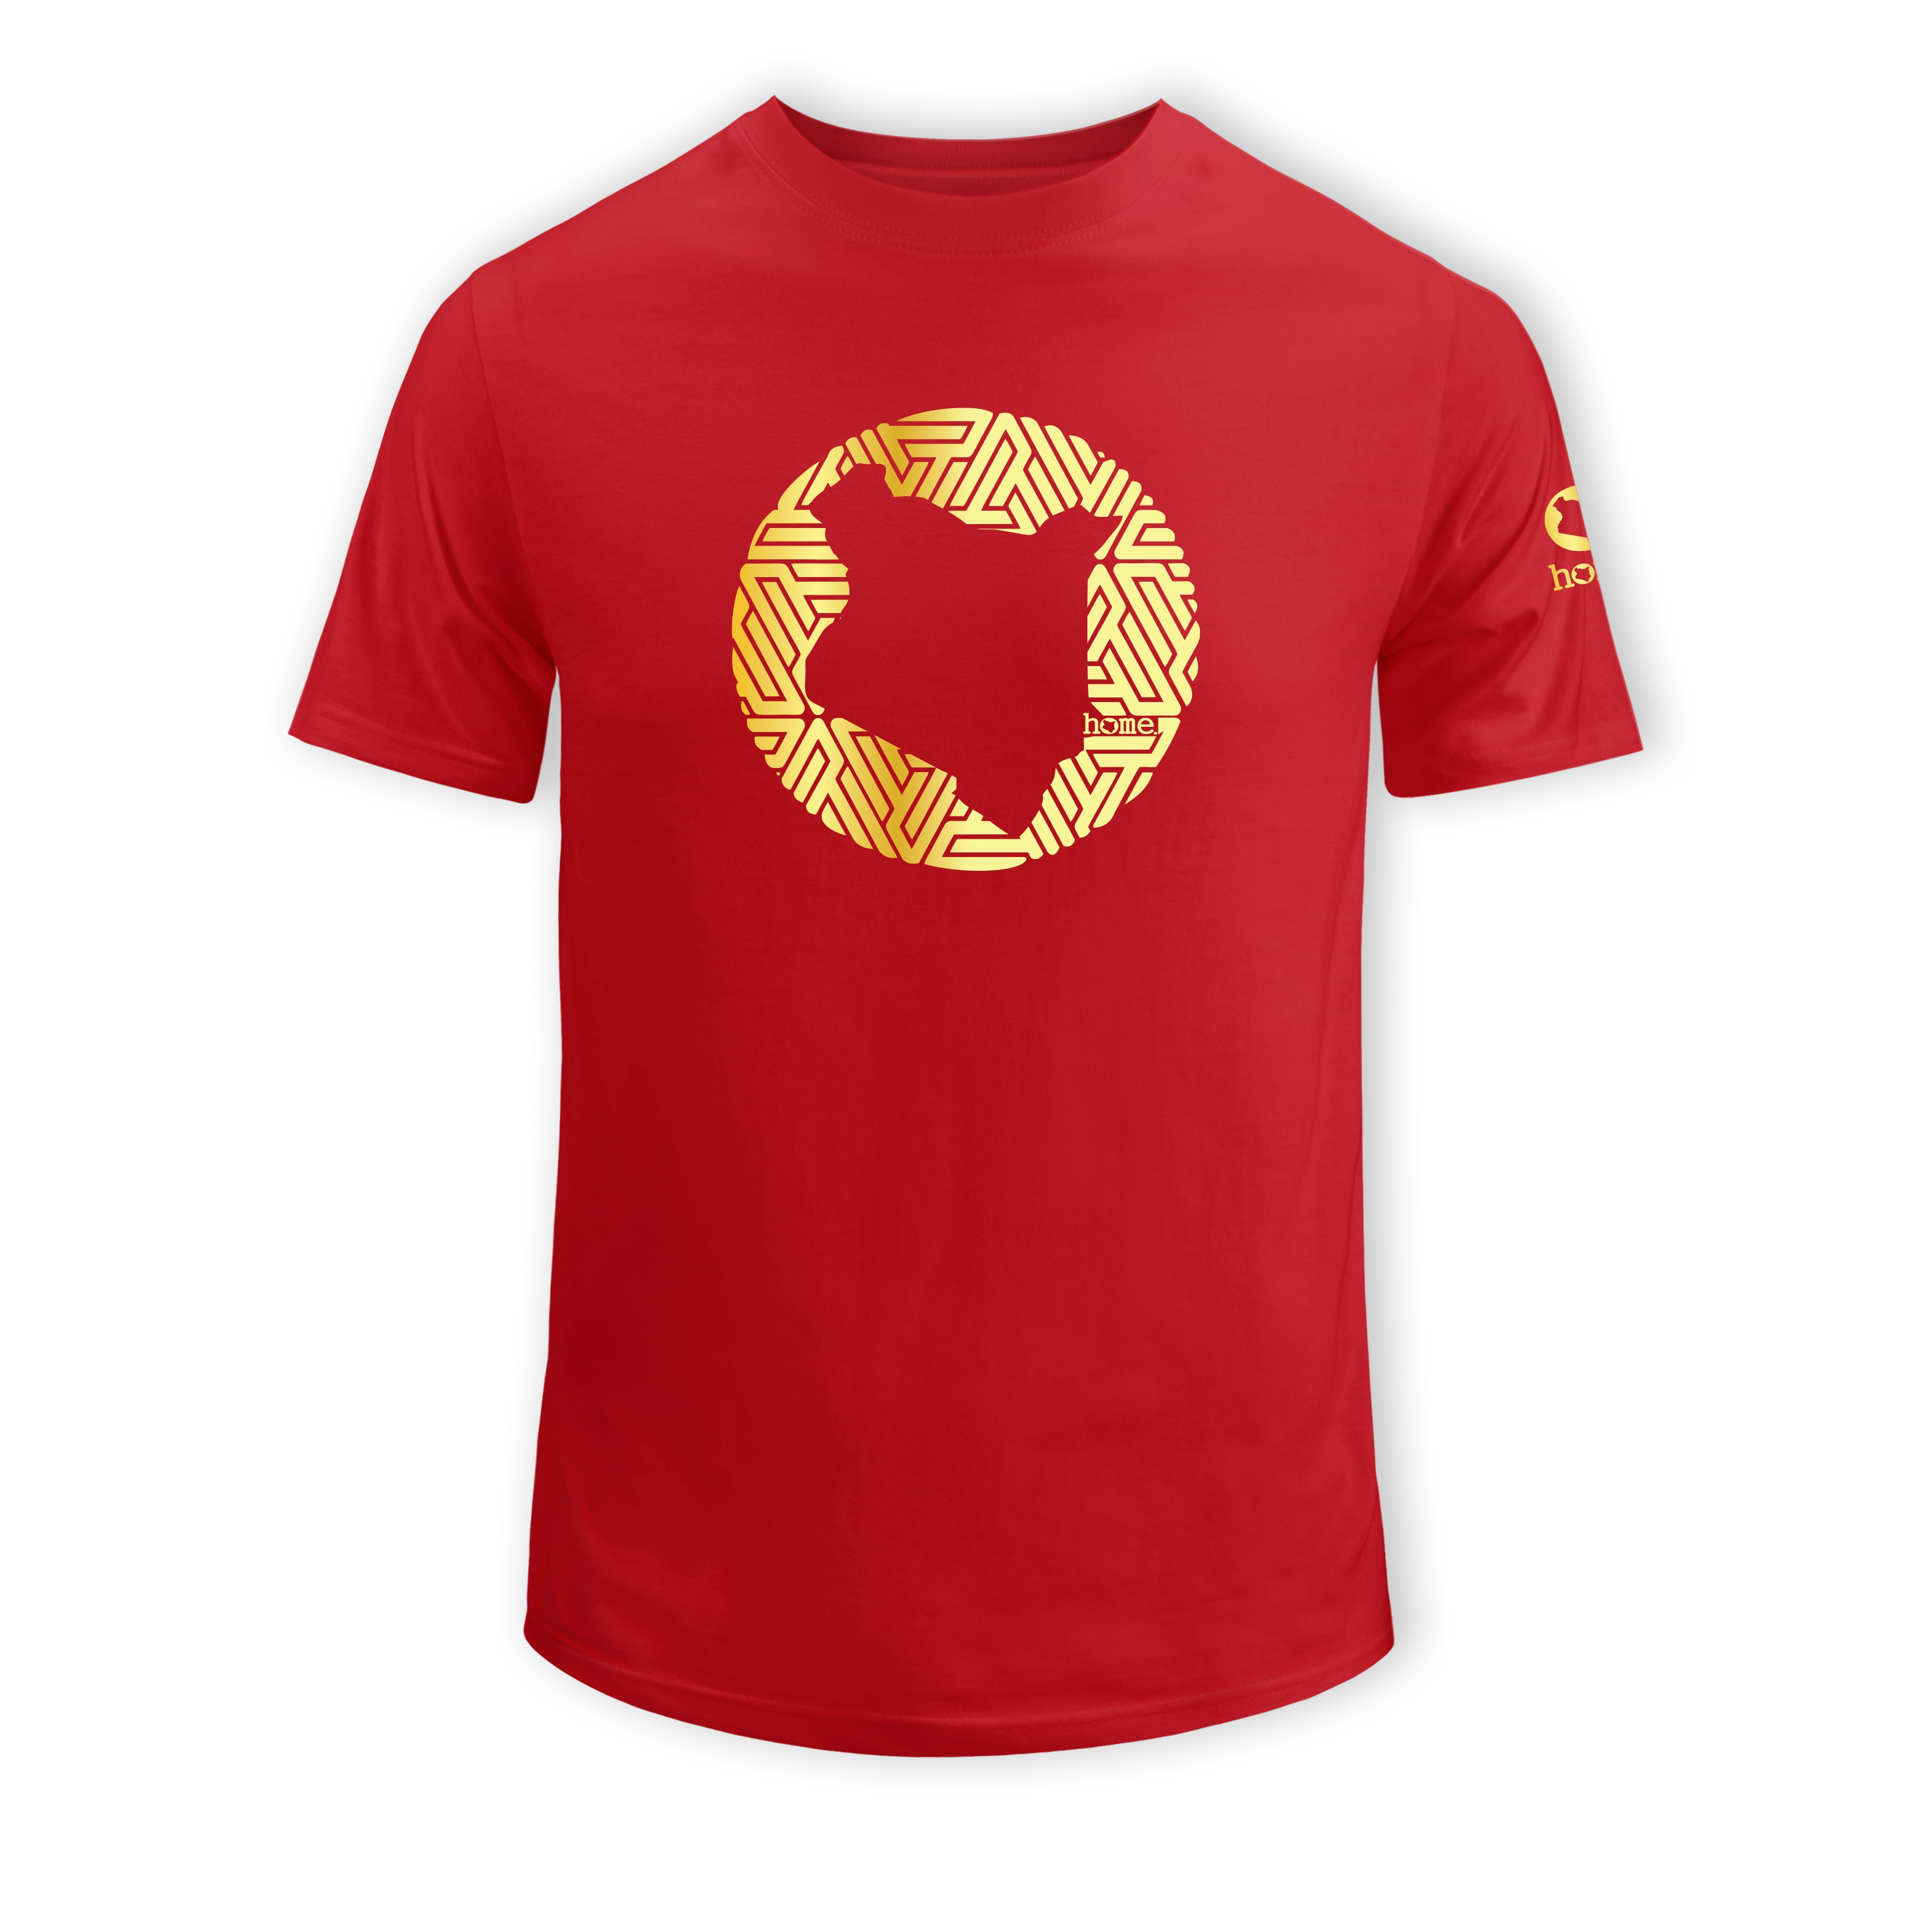 home_254 KIDS SHORT-SLEEVED RED T-SHIRT WITH A GOLD MAP PRINT – COTTON PLUS FABRIC